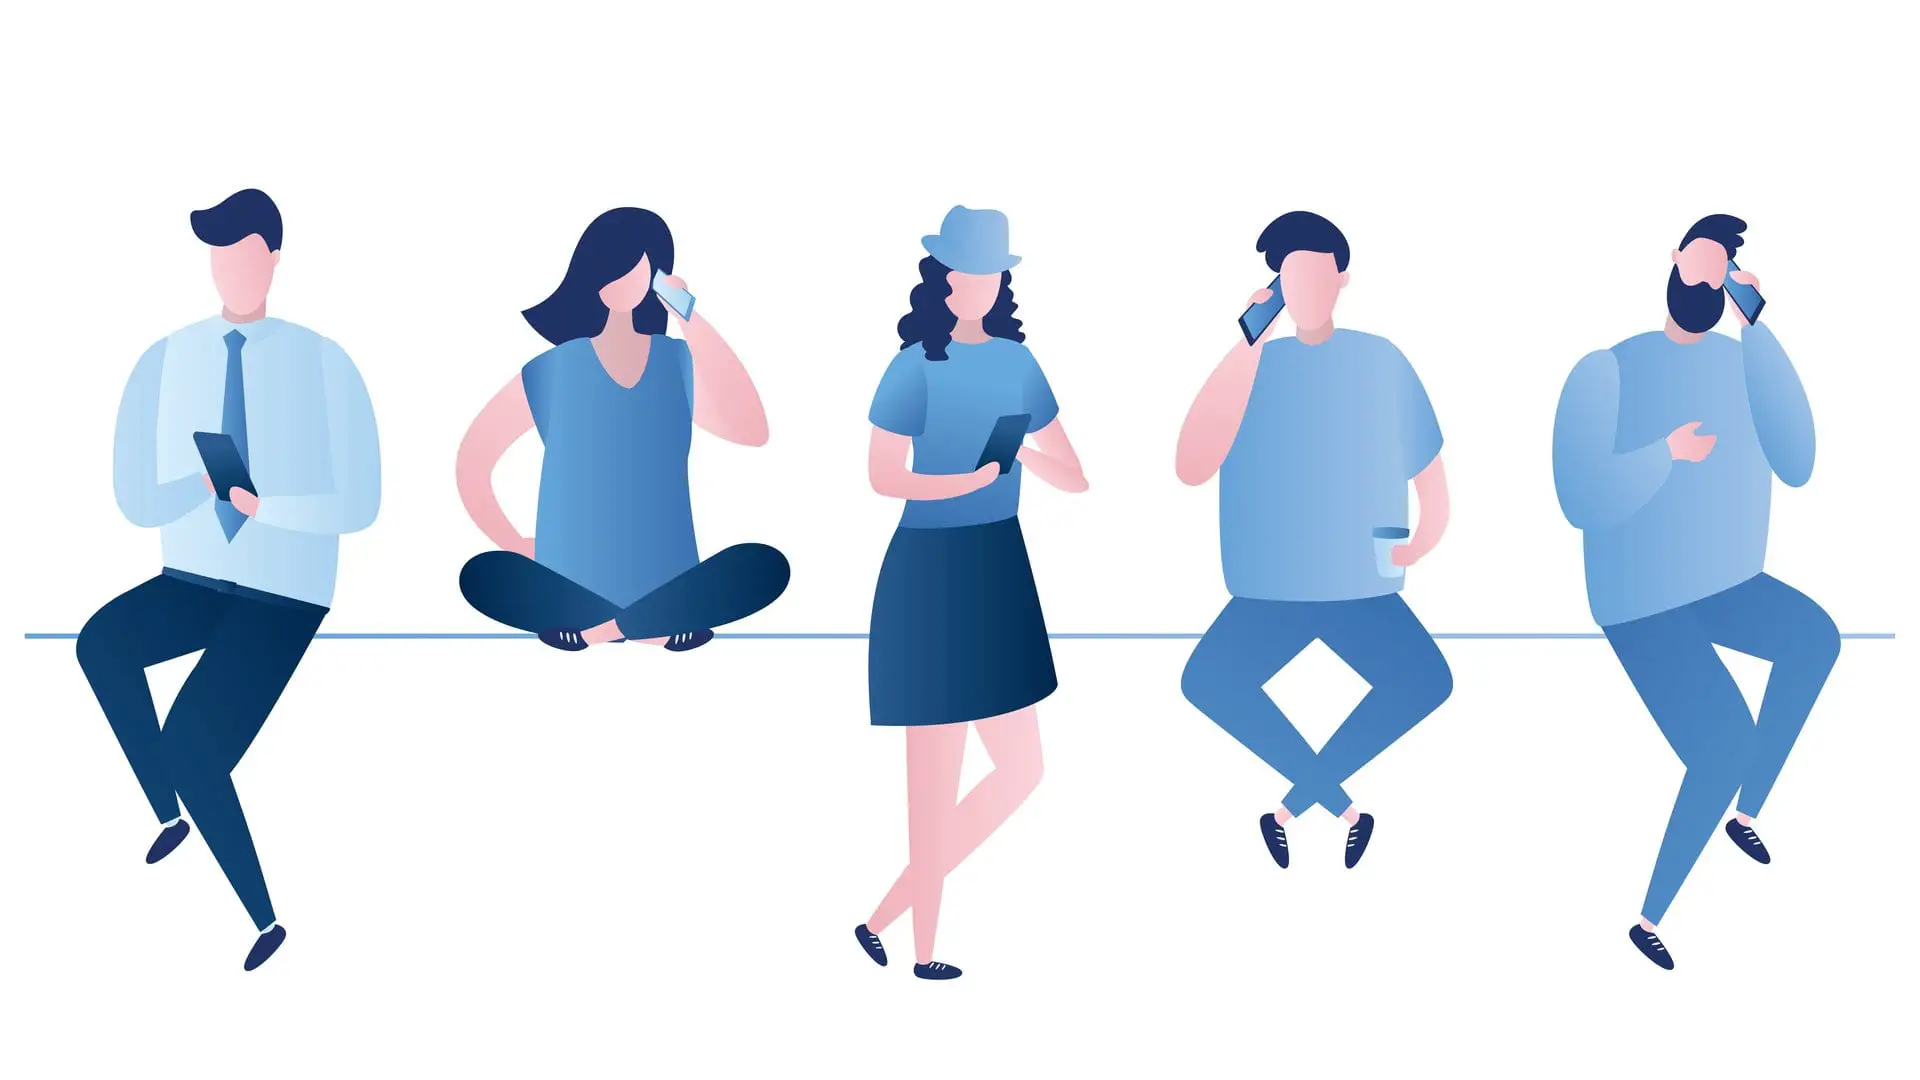 People Sit in Different Poses, Male and Female Characters With Smartphones, Calls and Chatting With Smart Gadgets, Trendy Style Vector Illustration.